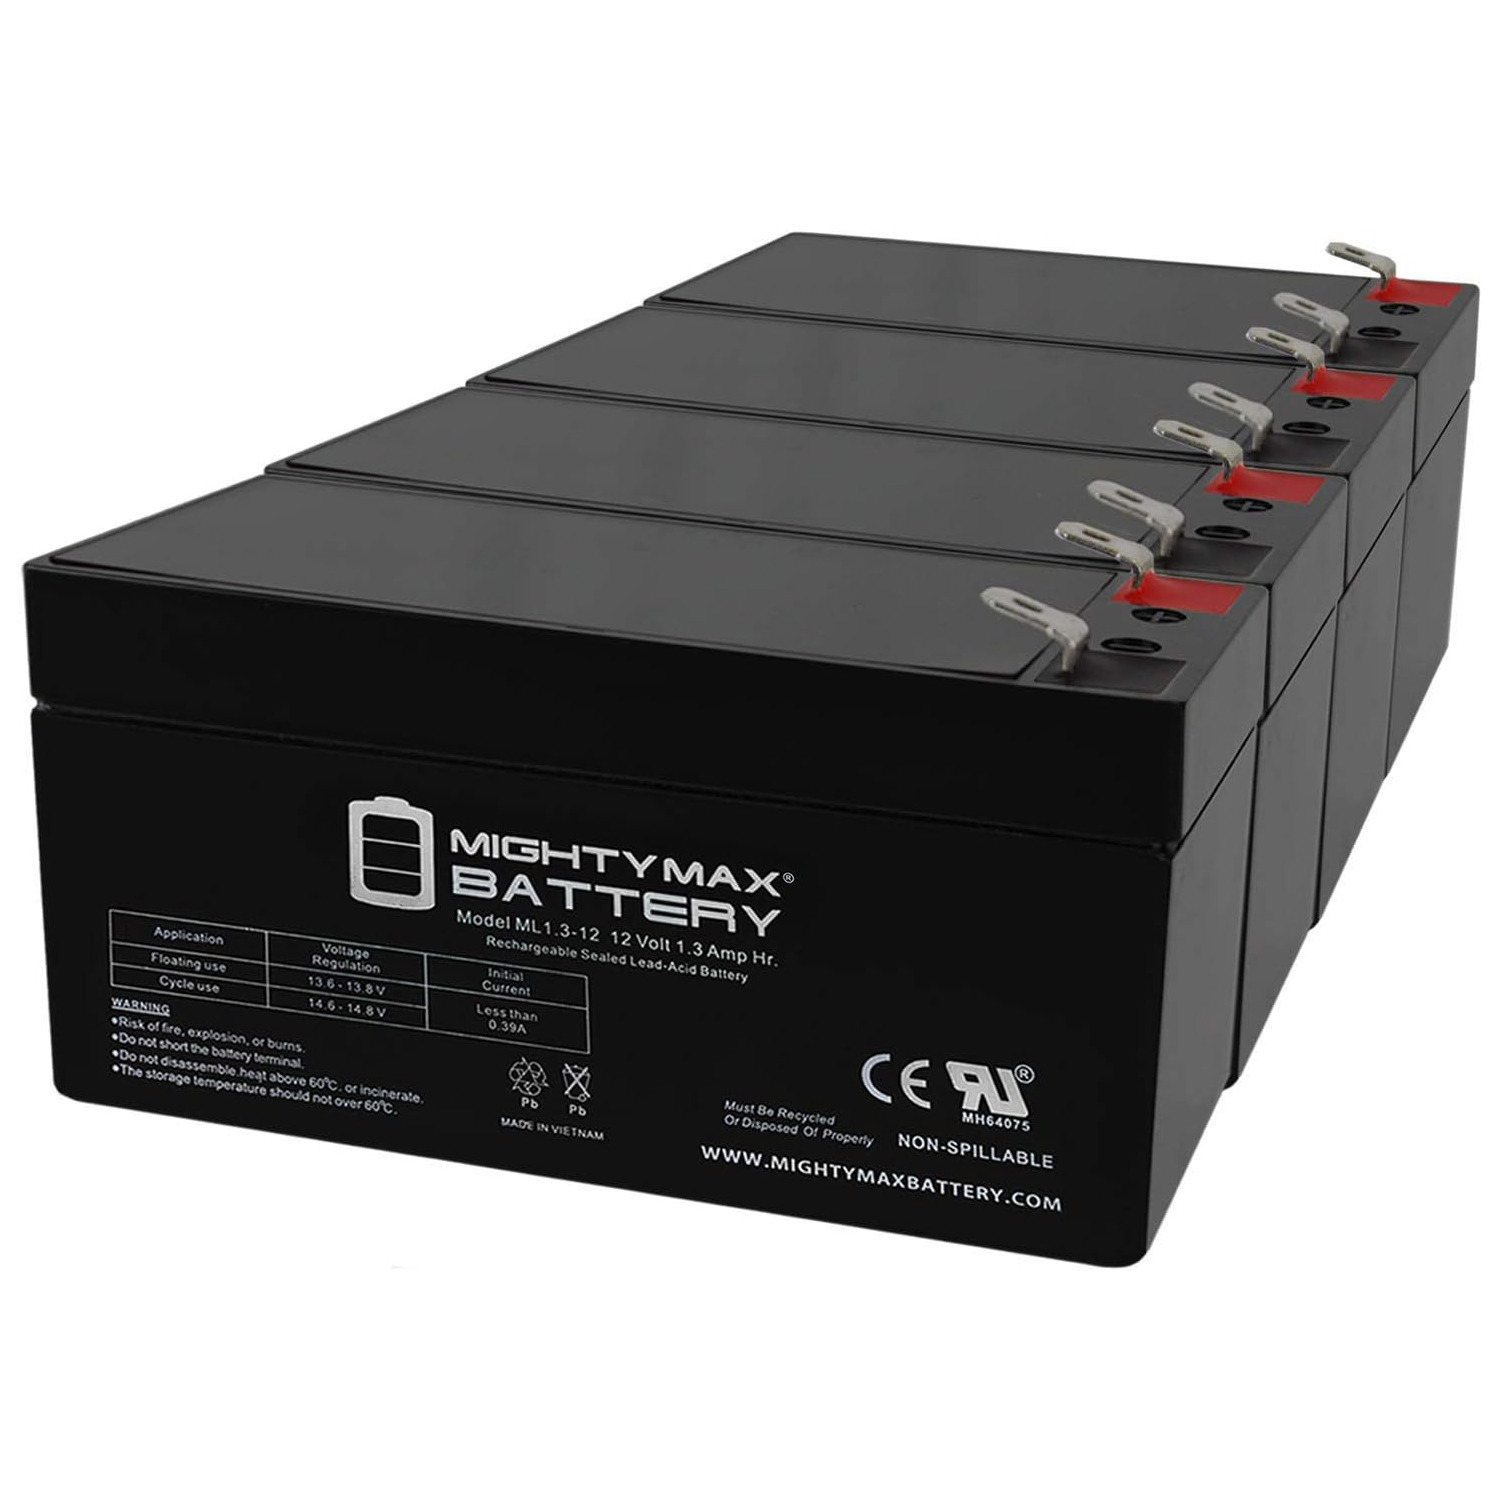 12V 1.3Ah Datashield UPS Replacement Battery - 4 Pack